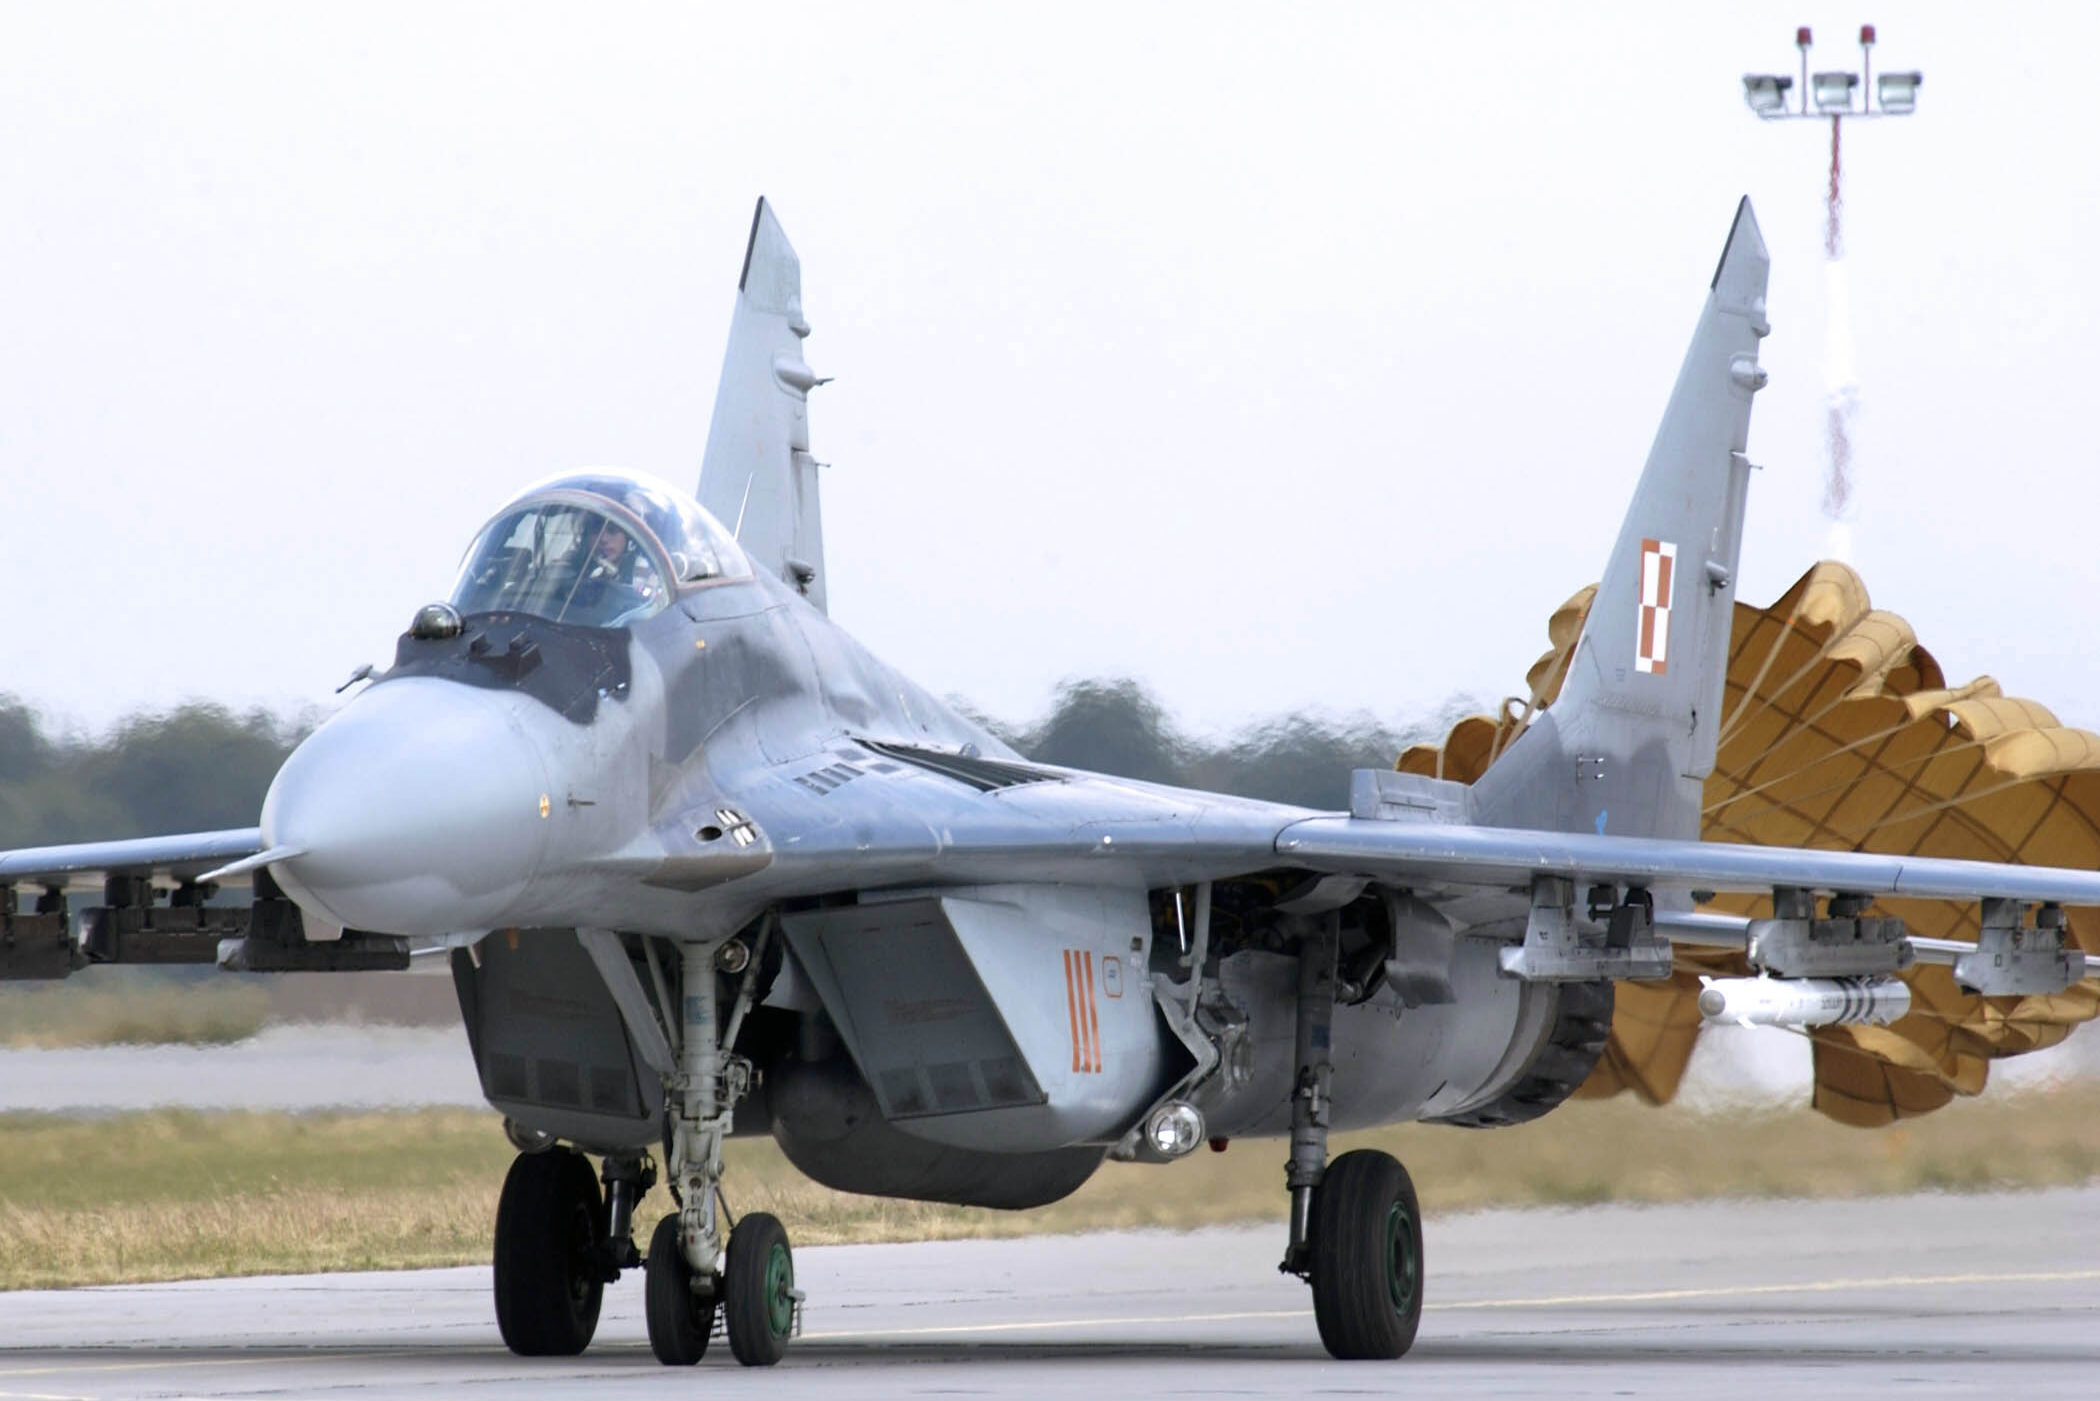 Germany Allows Poland To Transfer MiG-29 Fighter Jets To Ukraine